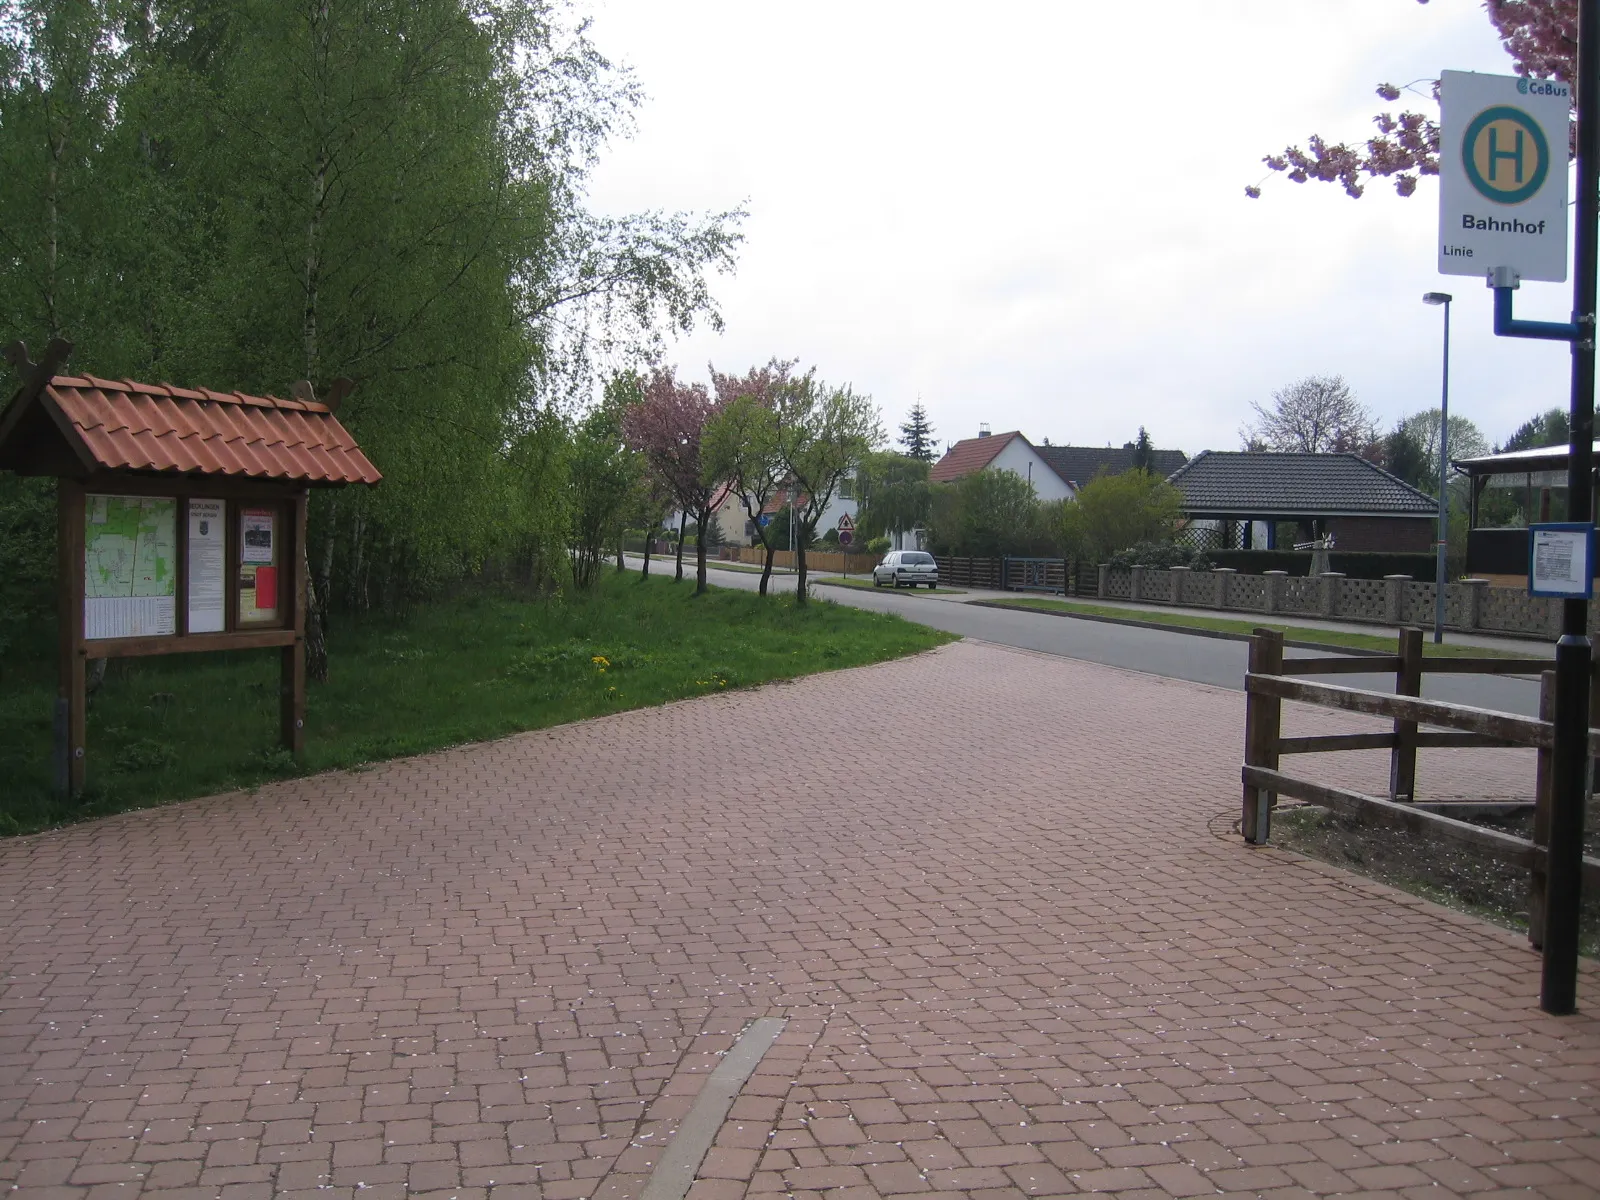 Photo showing: The settlement of Becklingen (Bahnhof) around the old station, viewed from the bus stop. Lower Saxony, Germany.